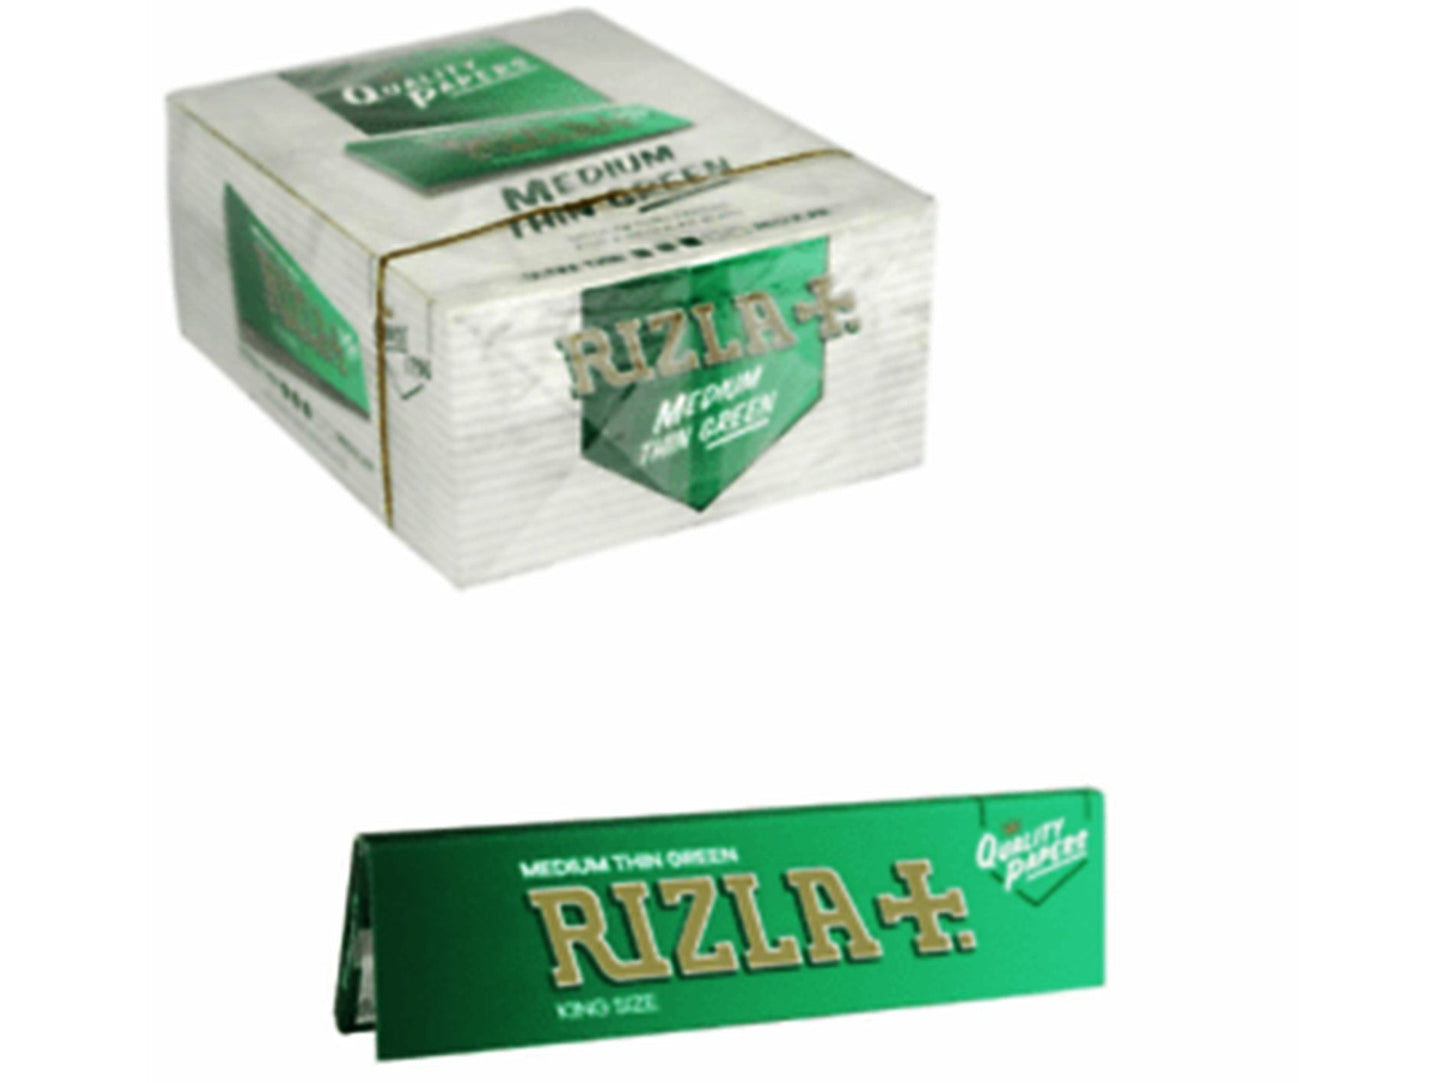 Rizla Green King Size Super Slim 50 Booklets Rolling Papers